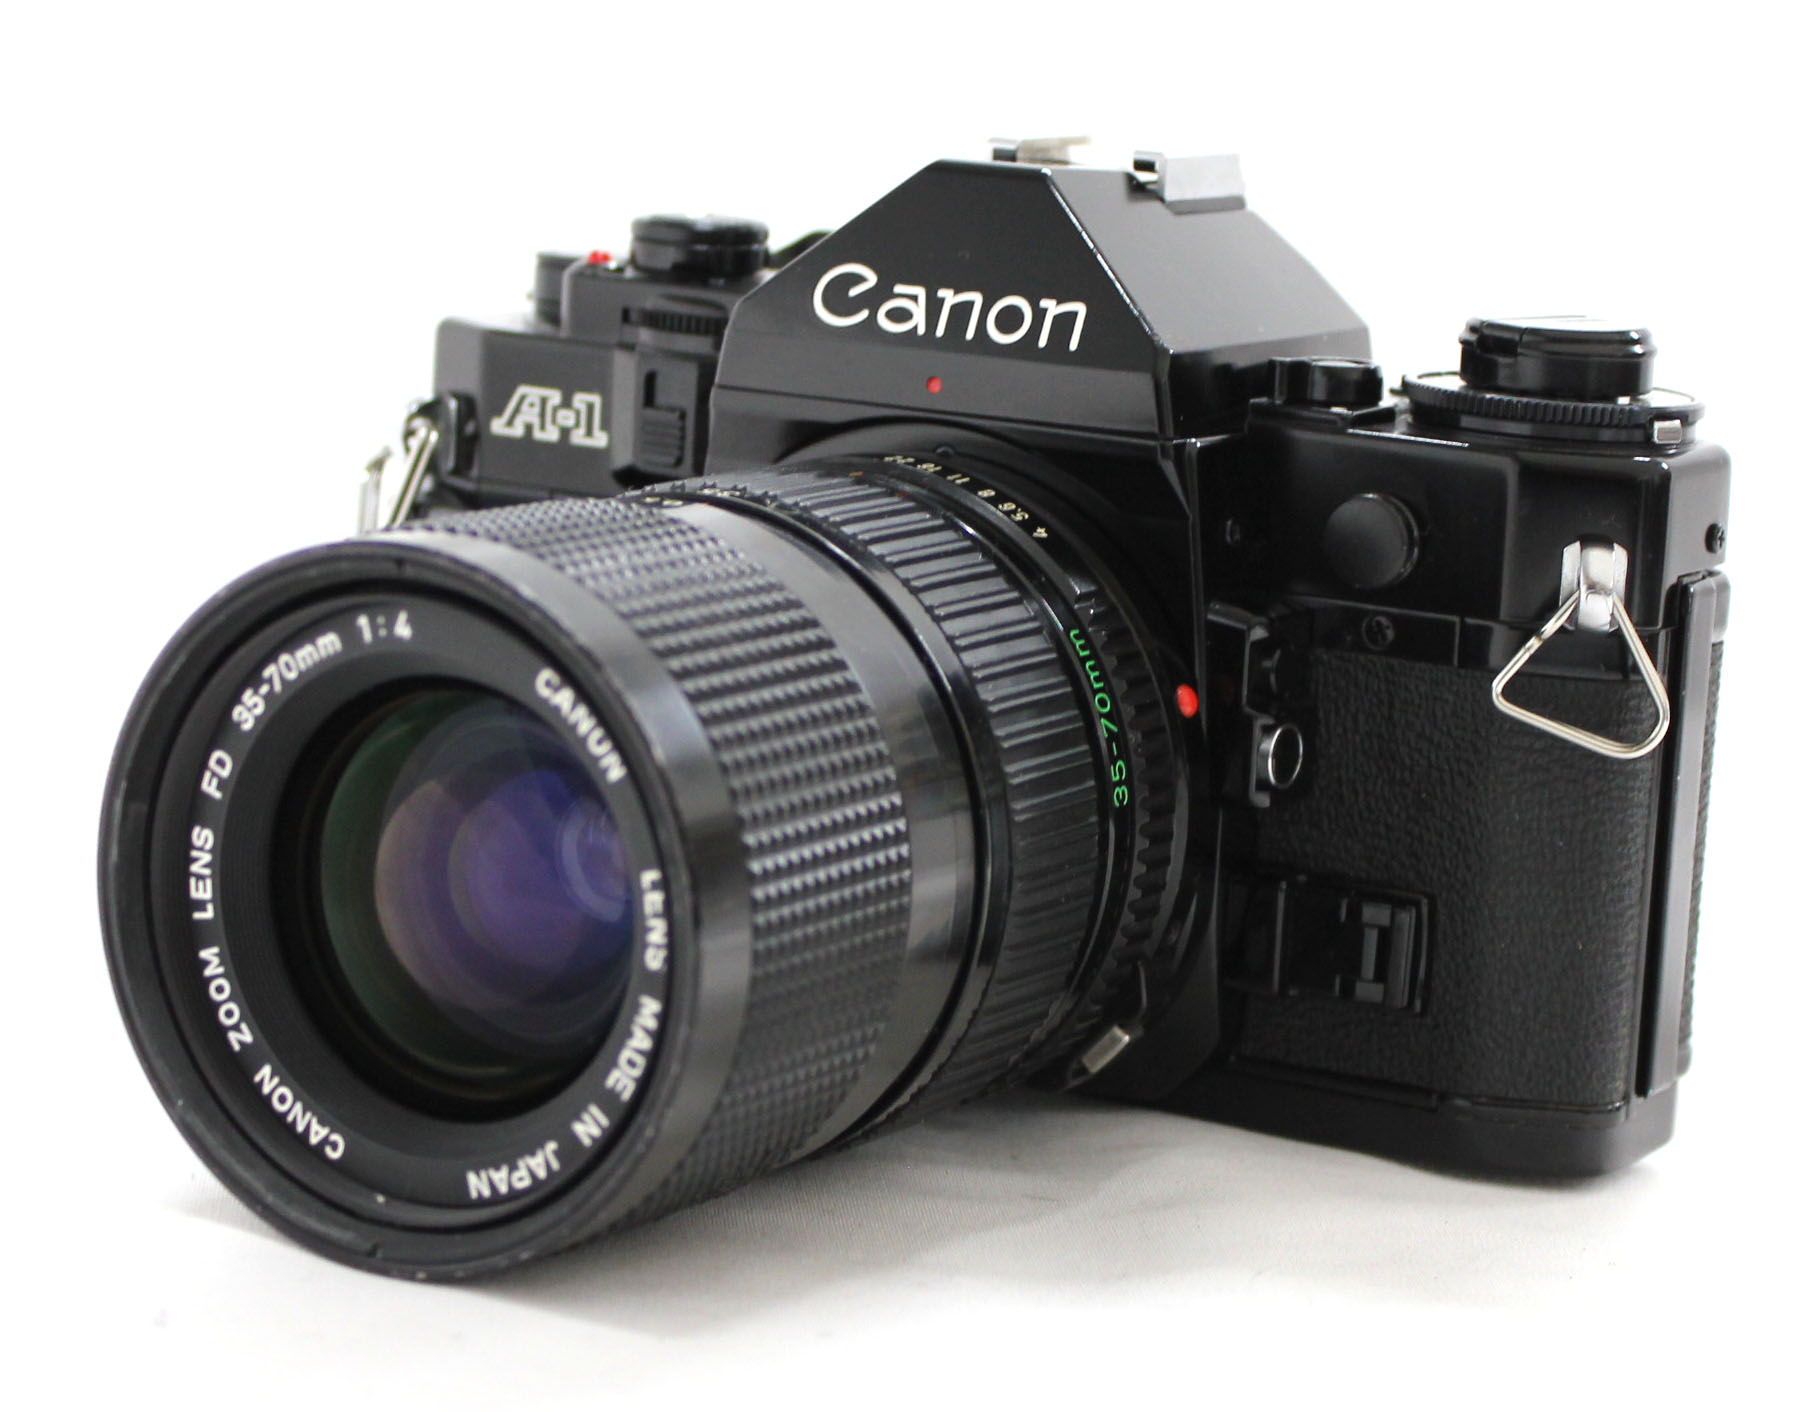 Japan Used Camera Shop | [Exc++++] Canon A-1 35mm SLR Film Camera with New FD 35-70mm F/4 Zoom Lens from Japan